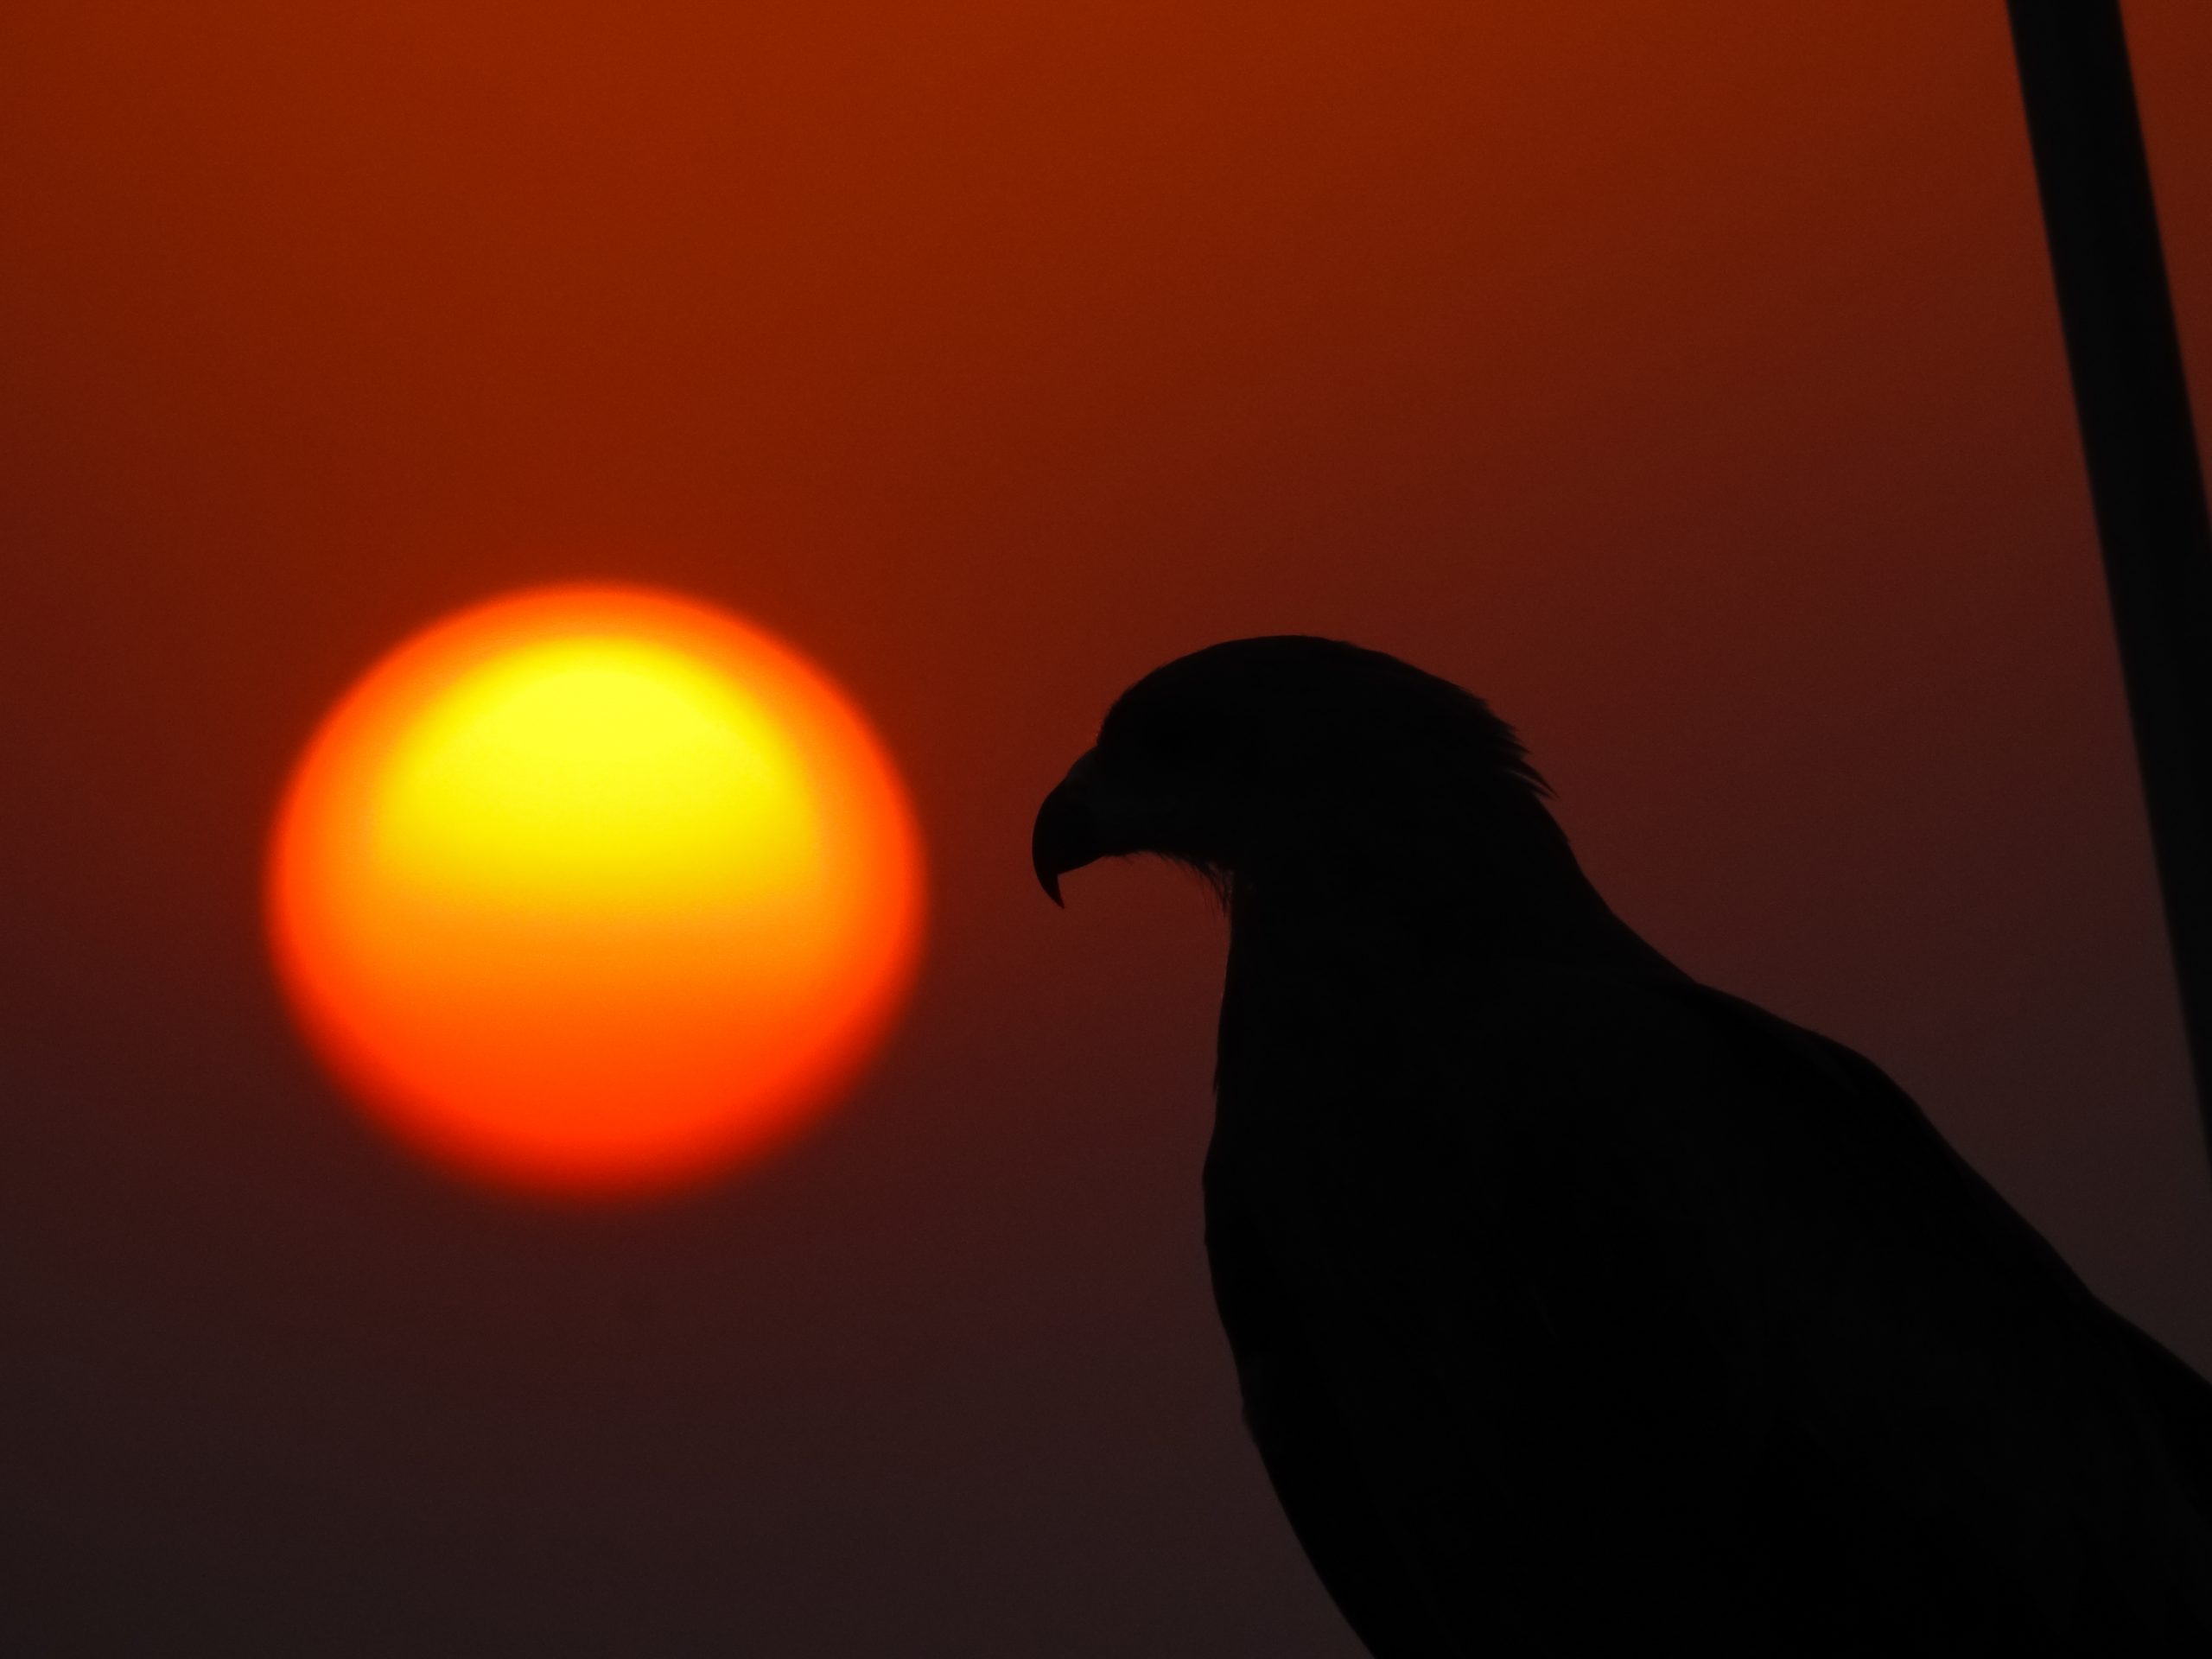 Bird and a Sunset Scenery on Focus